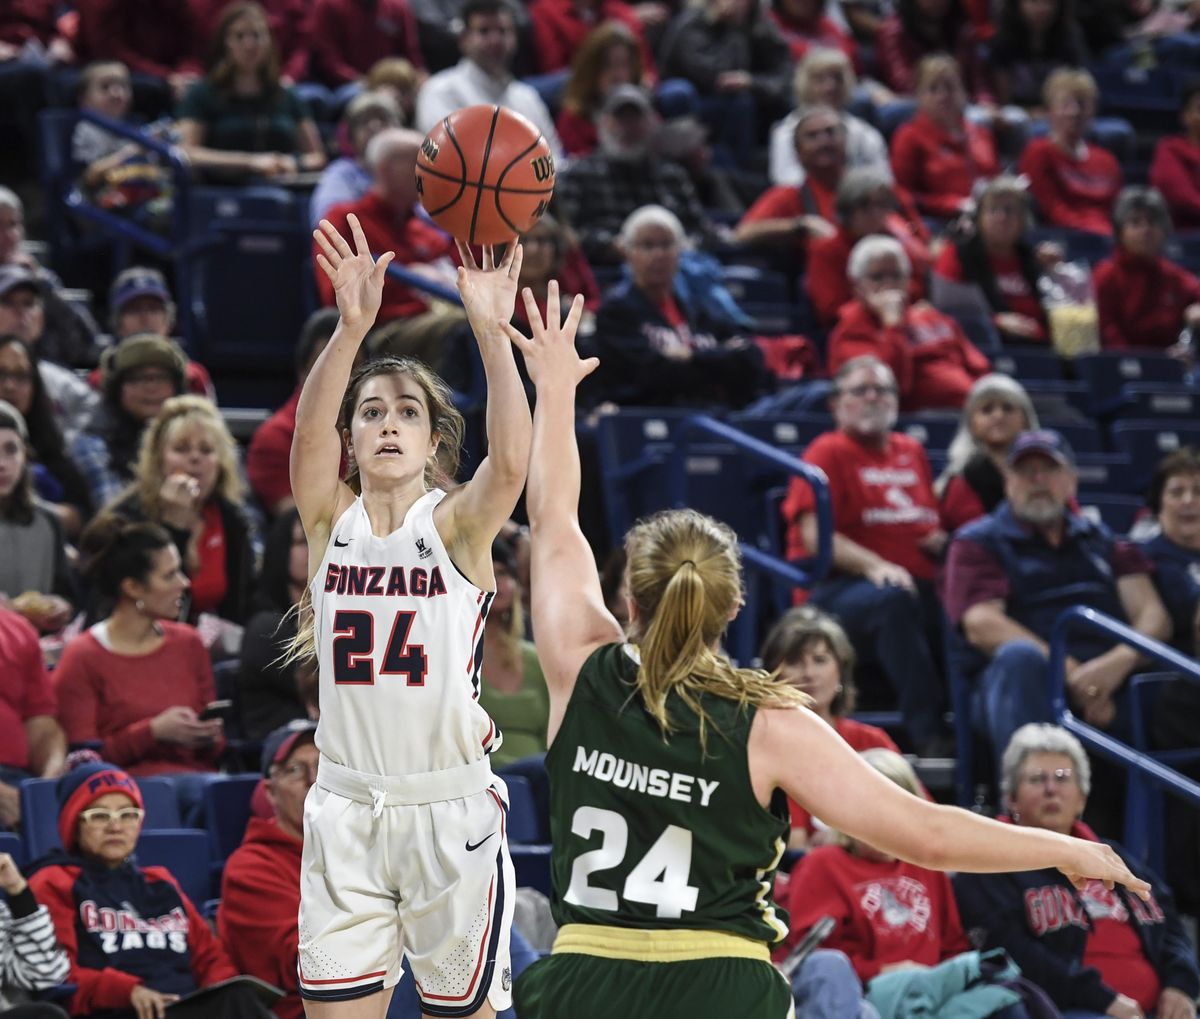 Gonzaga guard Katie Campbell hits a 3-pointer over Colorado State guard Mollie Mounsey on Nov. 28  in the McCarthey Athletic Center. (Dan Pelle / The Spokesman-Review)